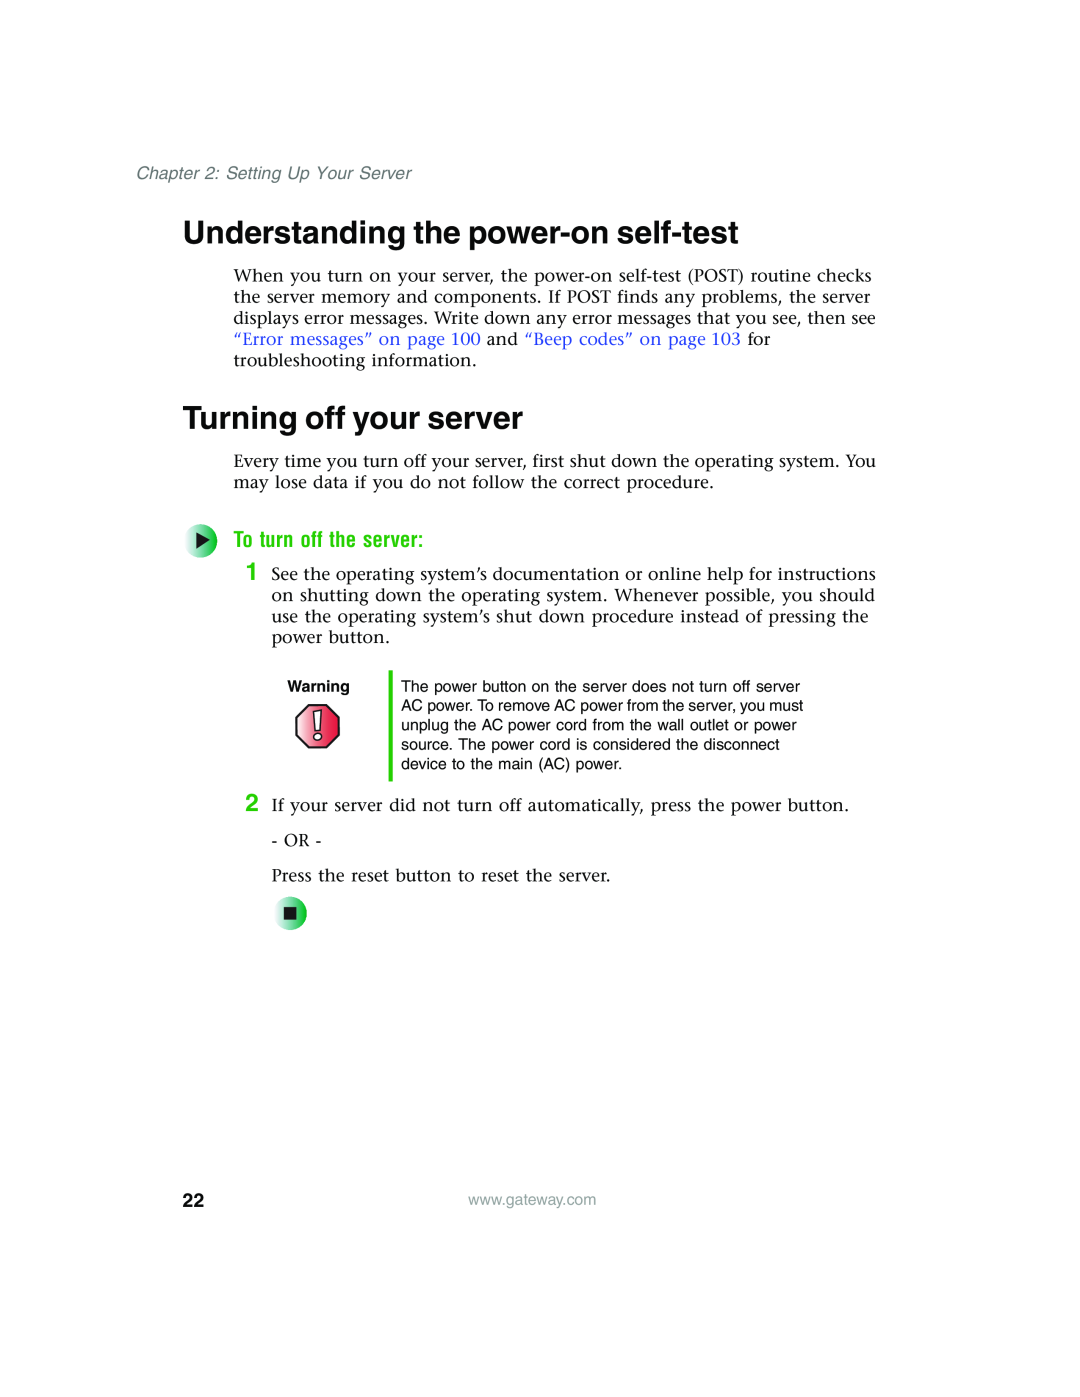 Gateway 955 Understanding the power-on self-test, Turning off your server, To turn off the server, Setting Up Your Server 